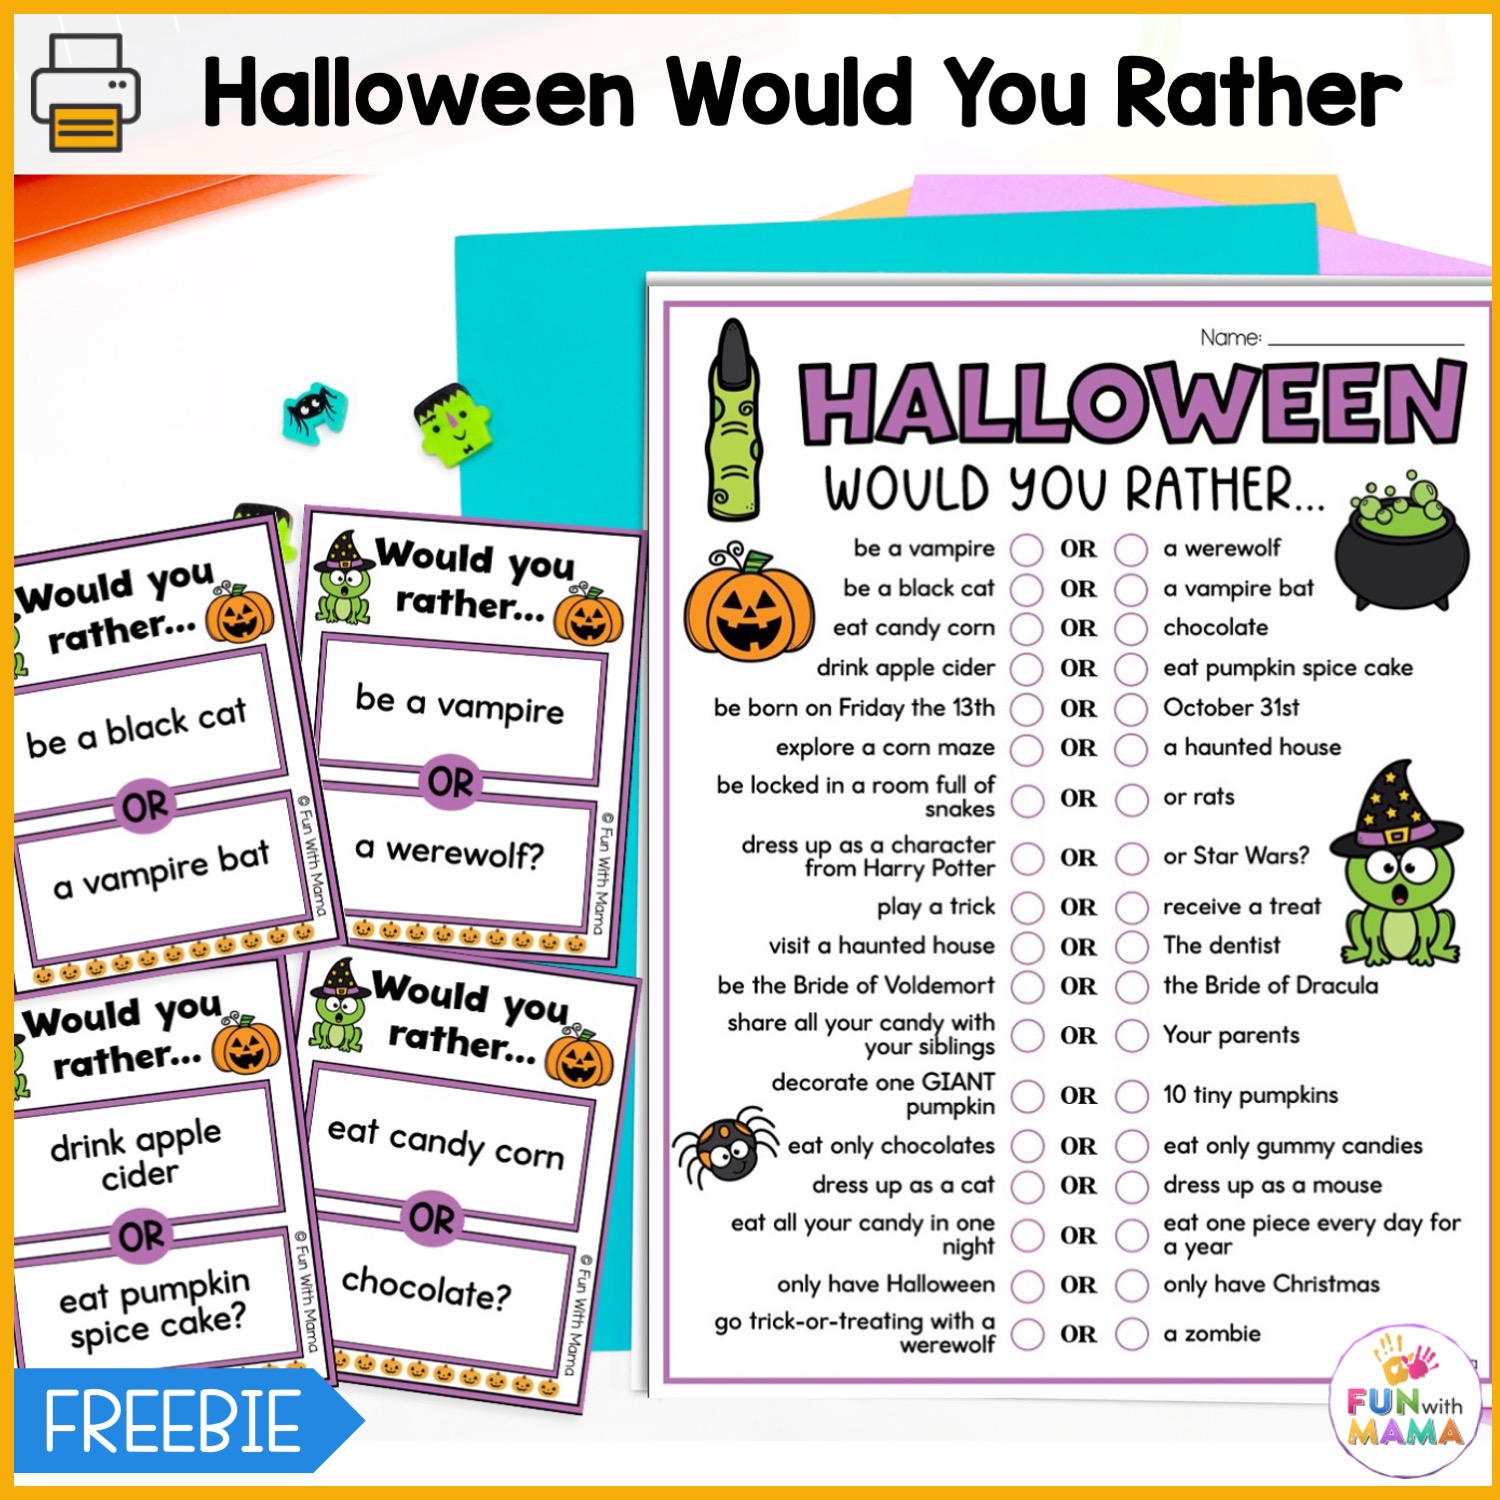 Halloween would you rather questions